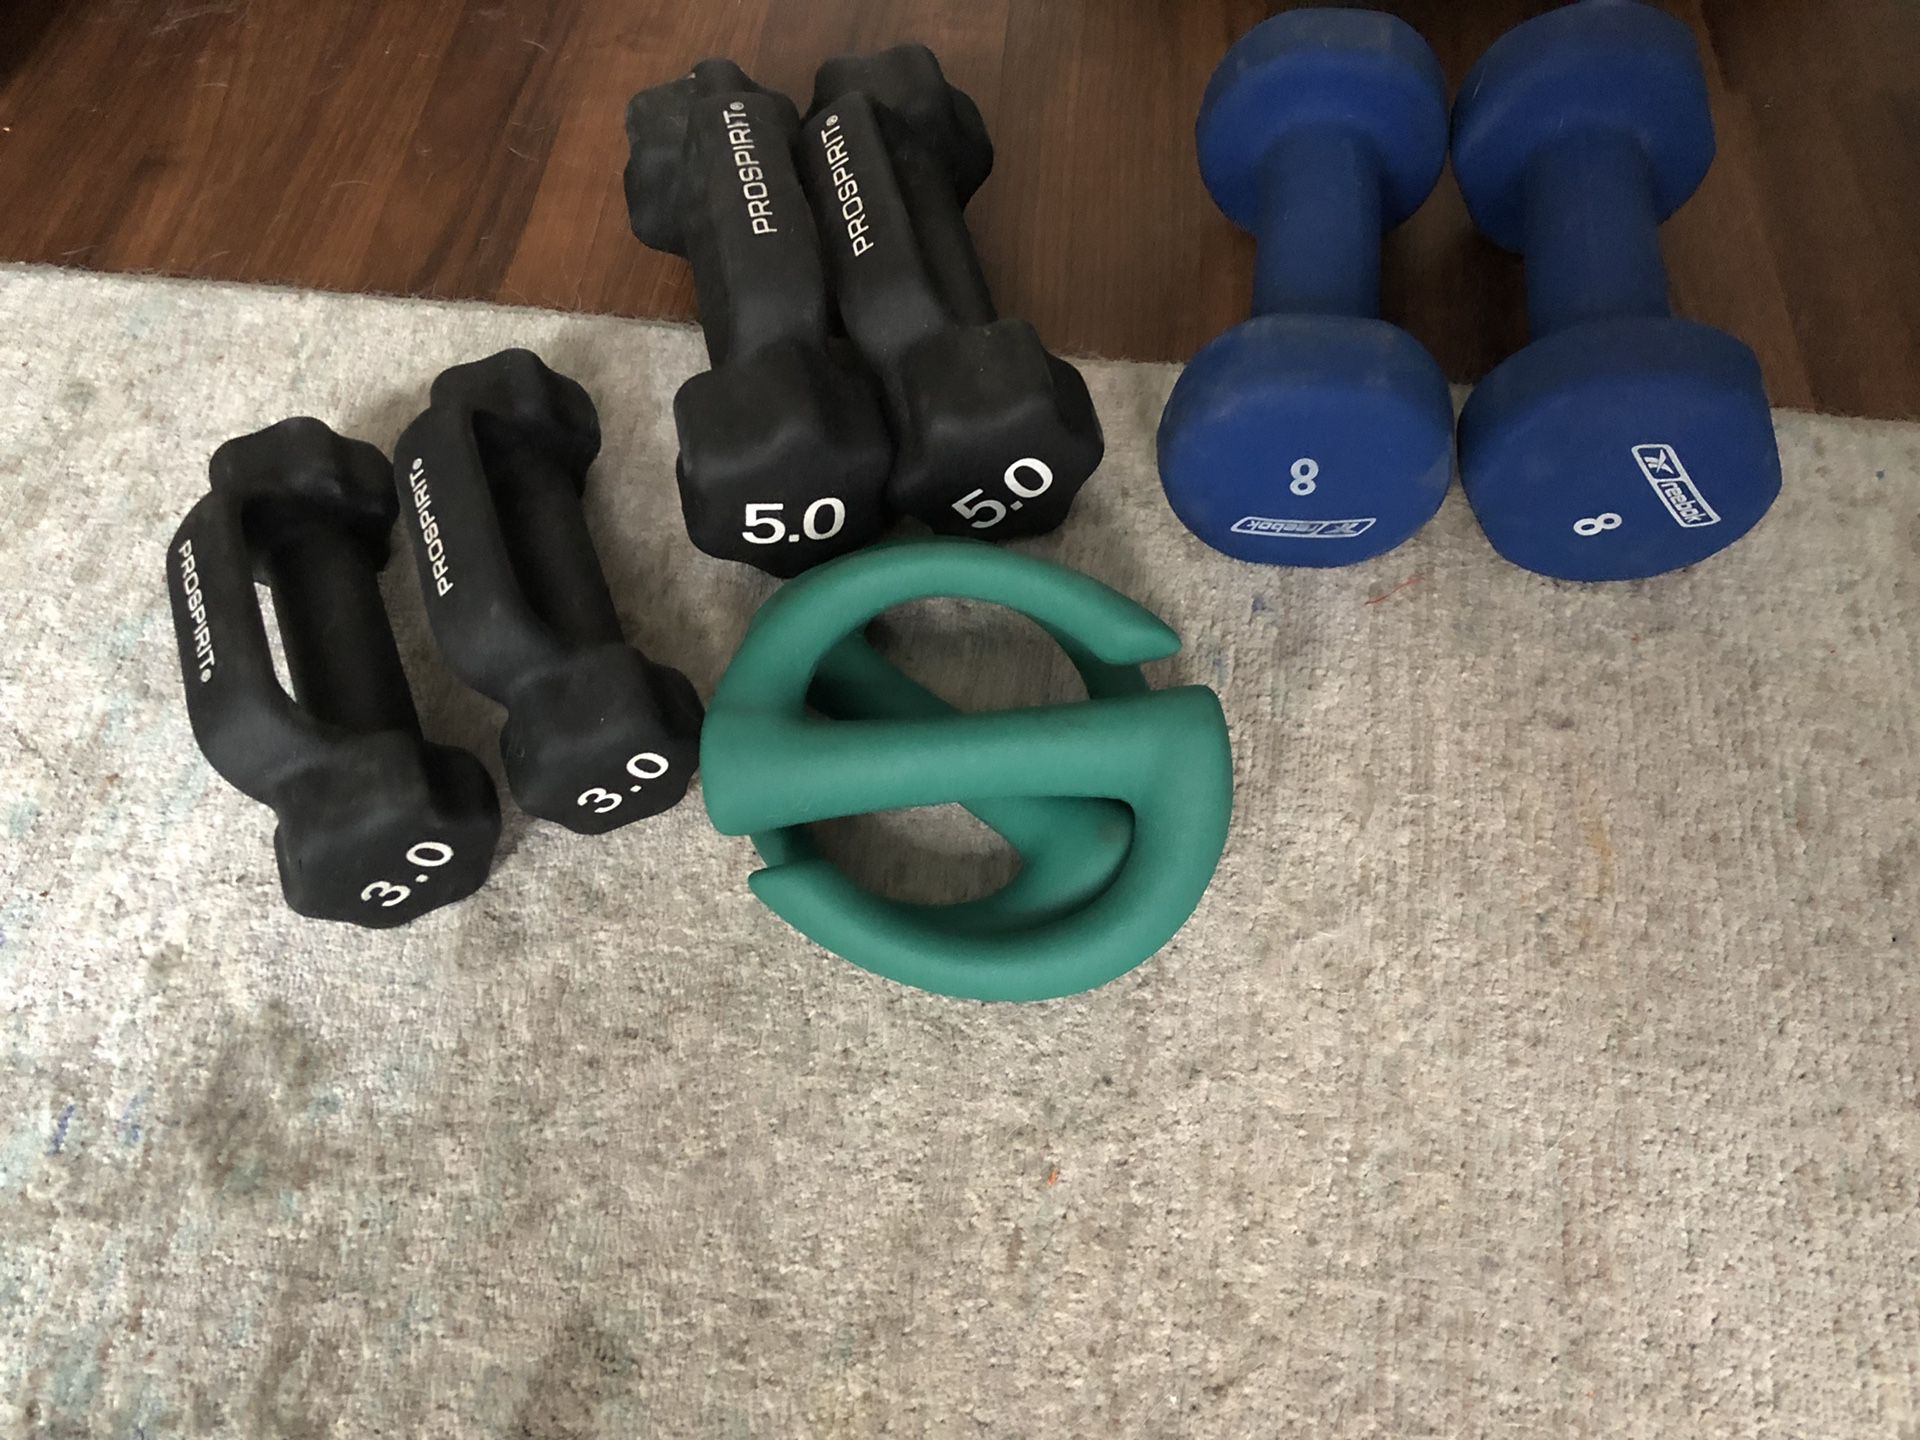 Small weights set